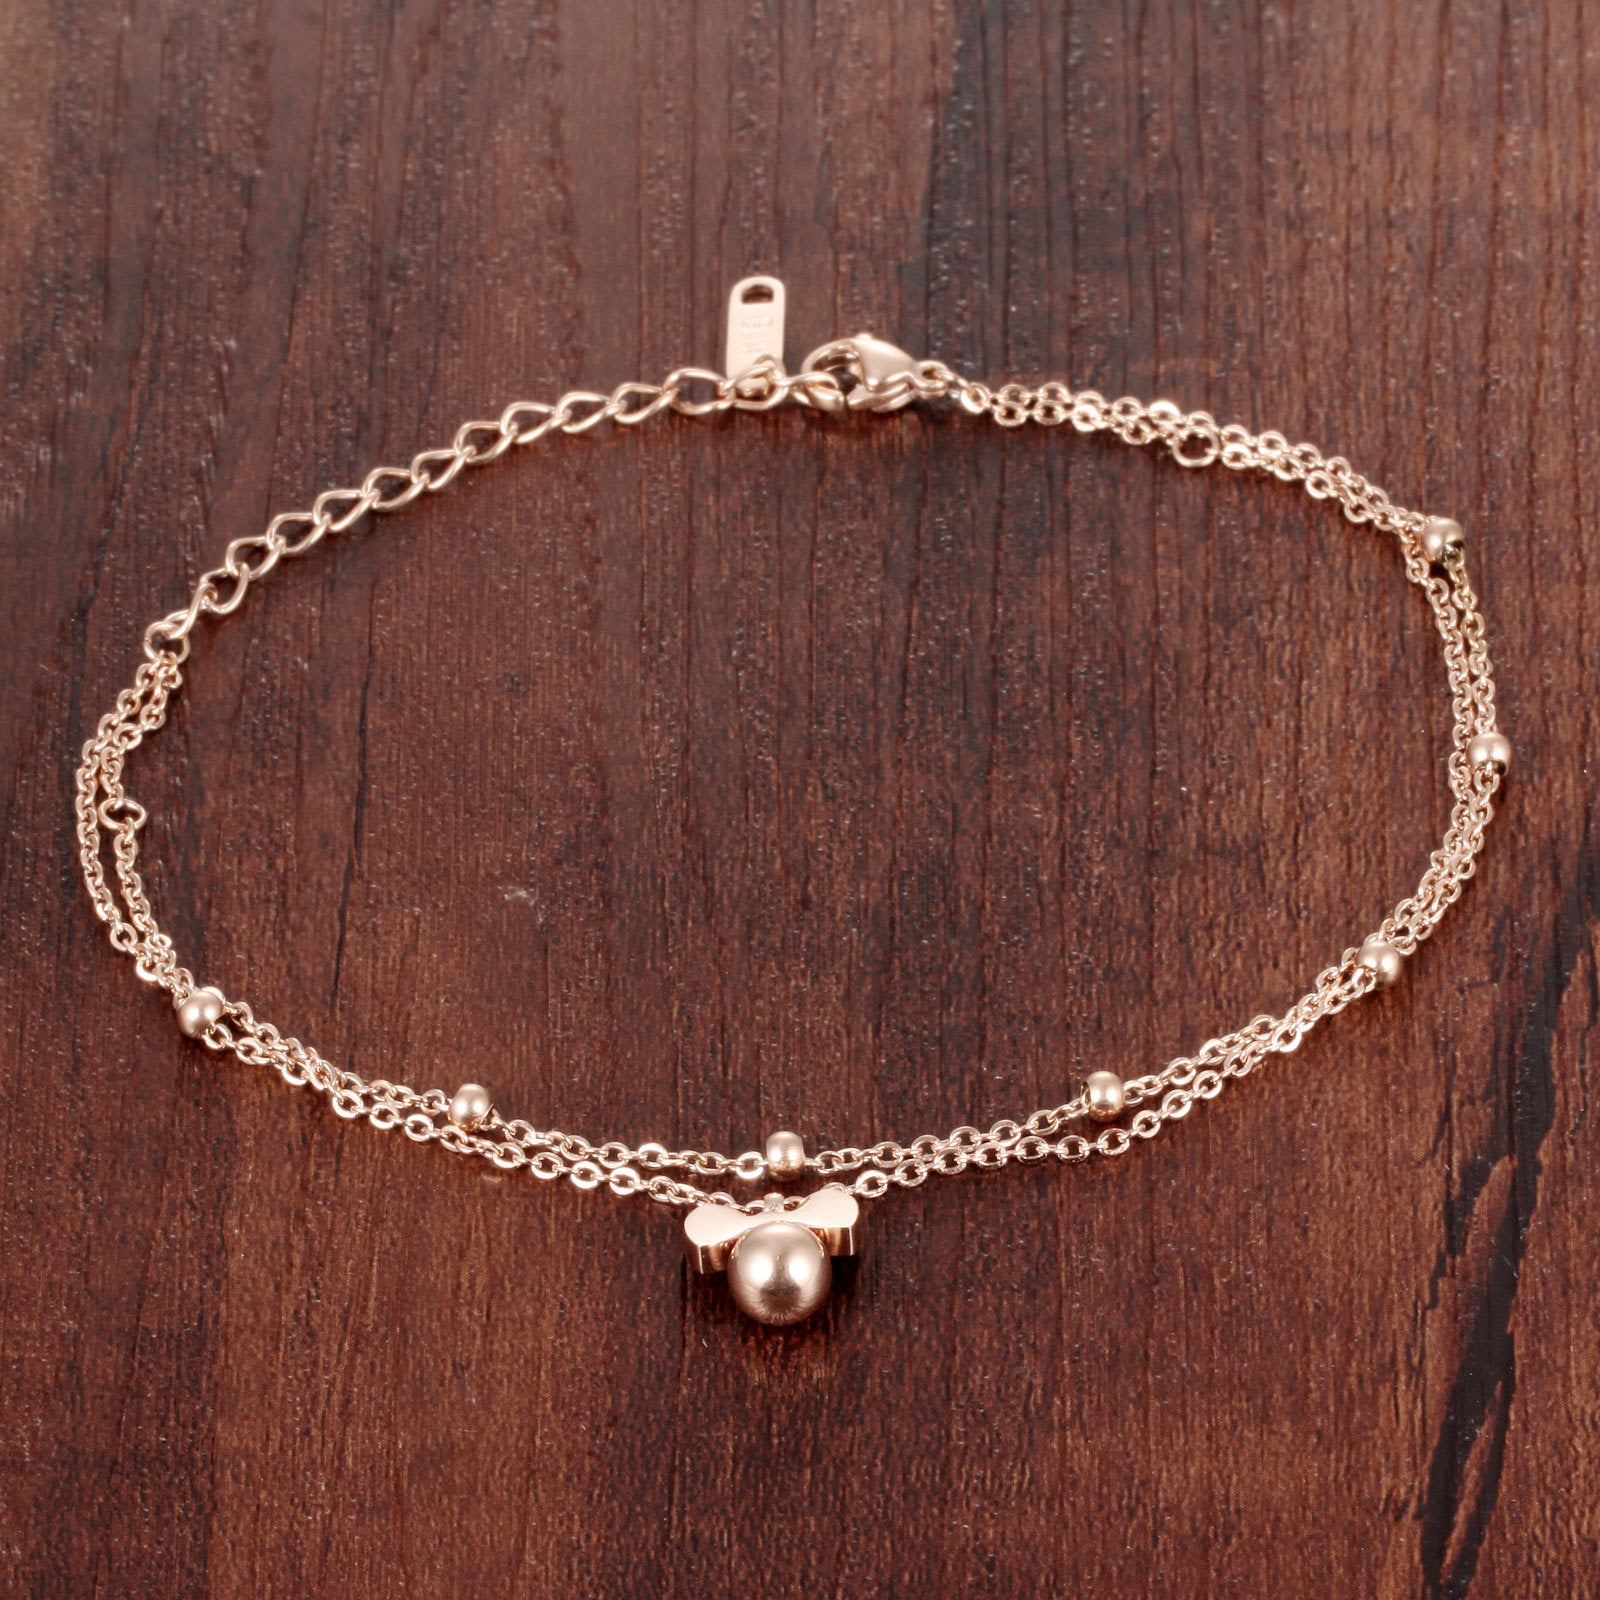 Lokaer New Delicate Bowknot Anklets